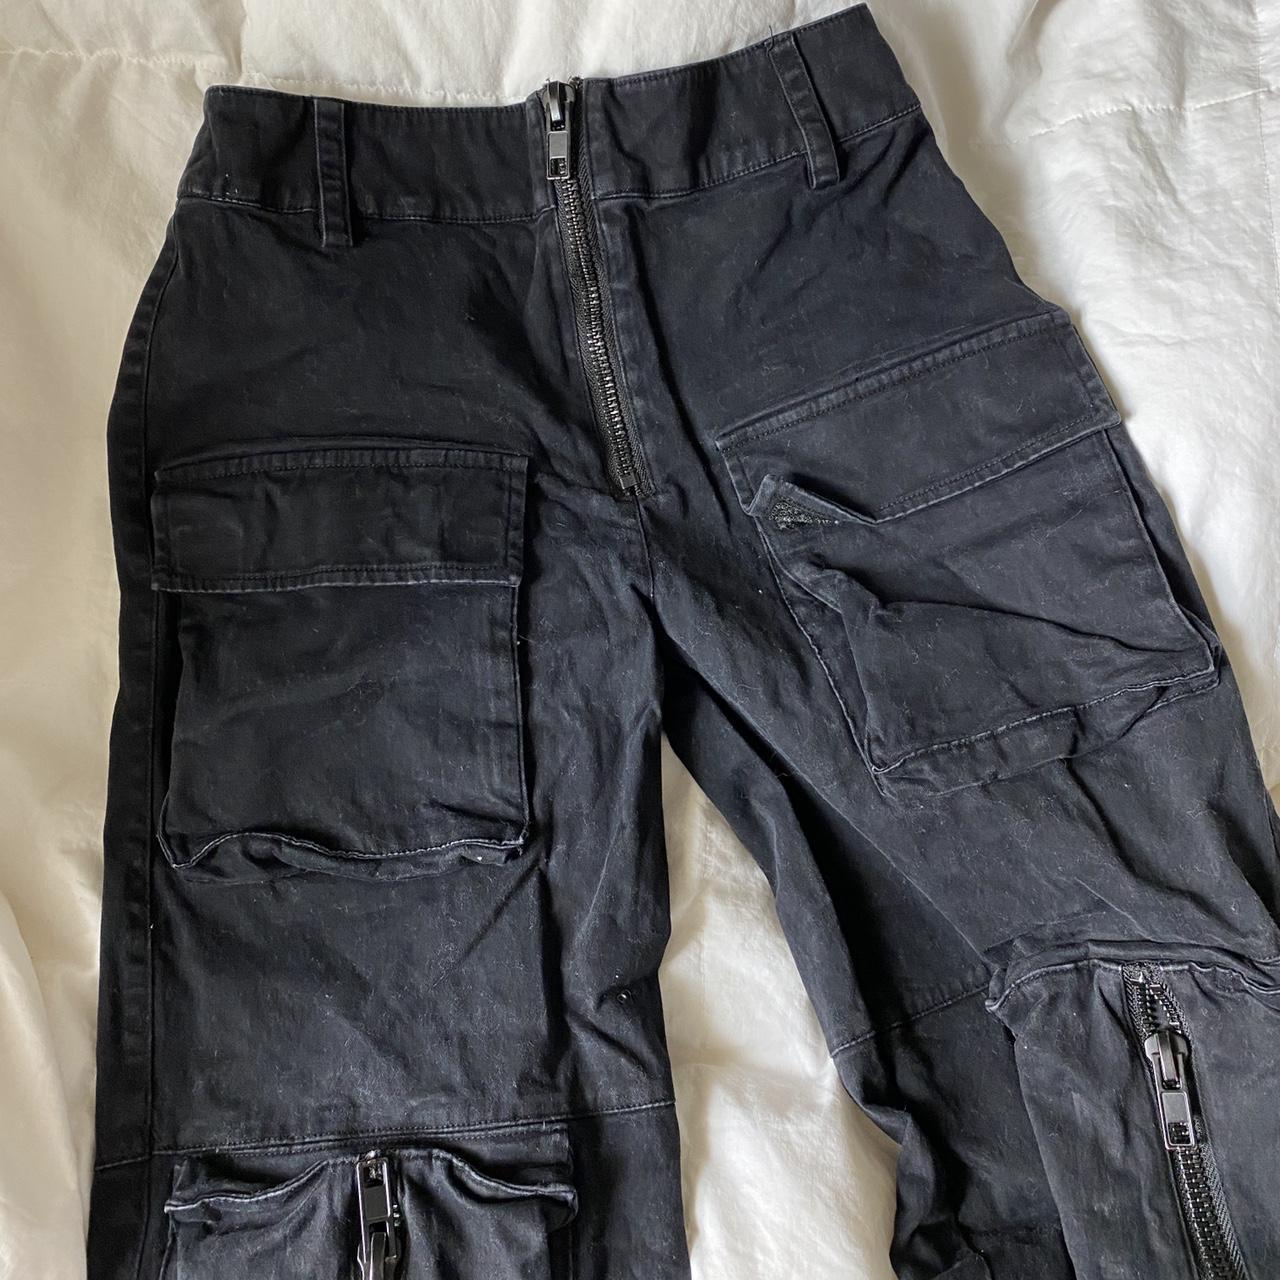 Black cargo pants • perfect for raves bc hella... - Depop